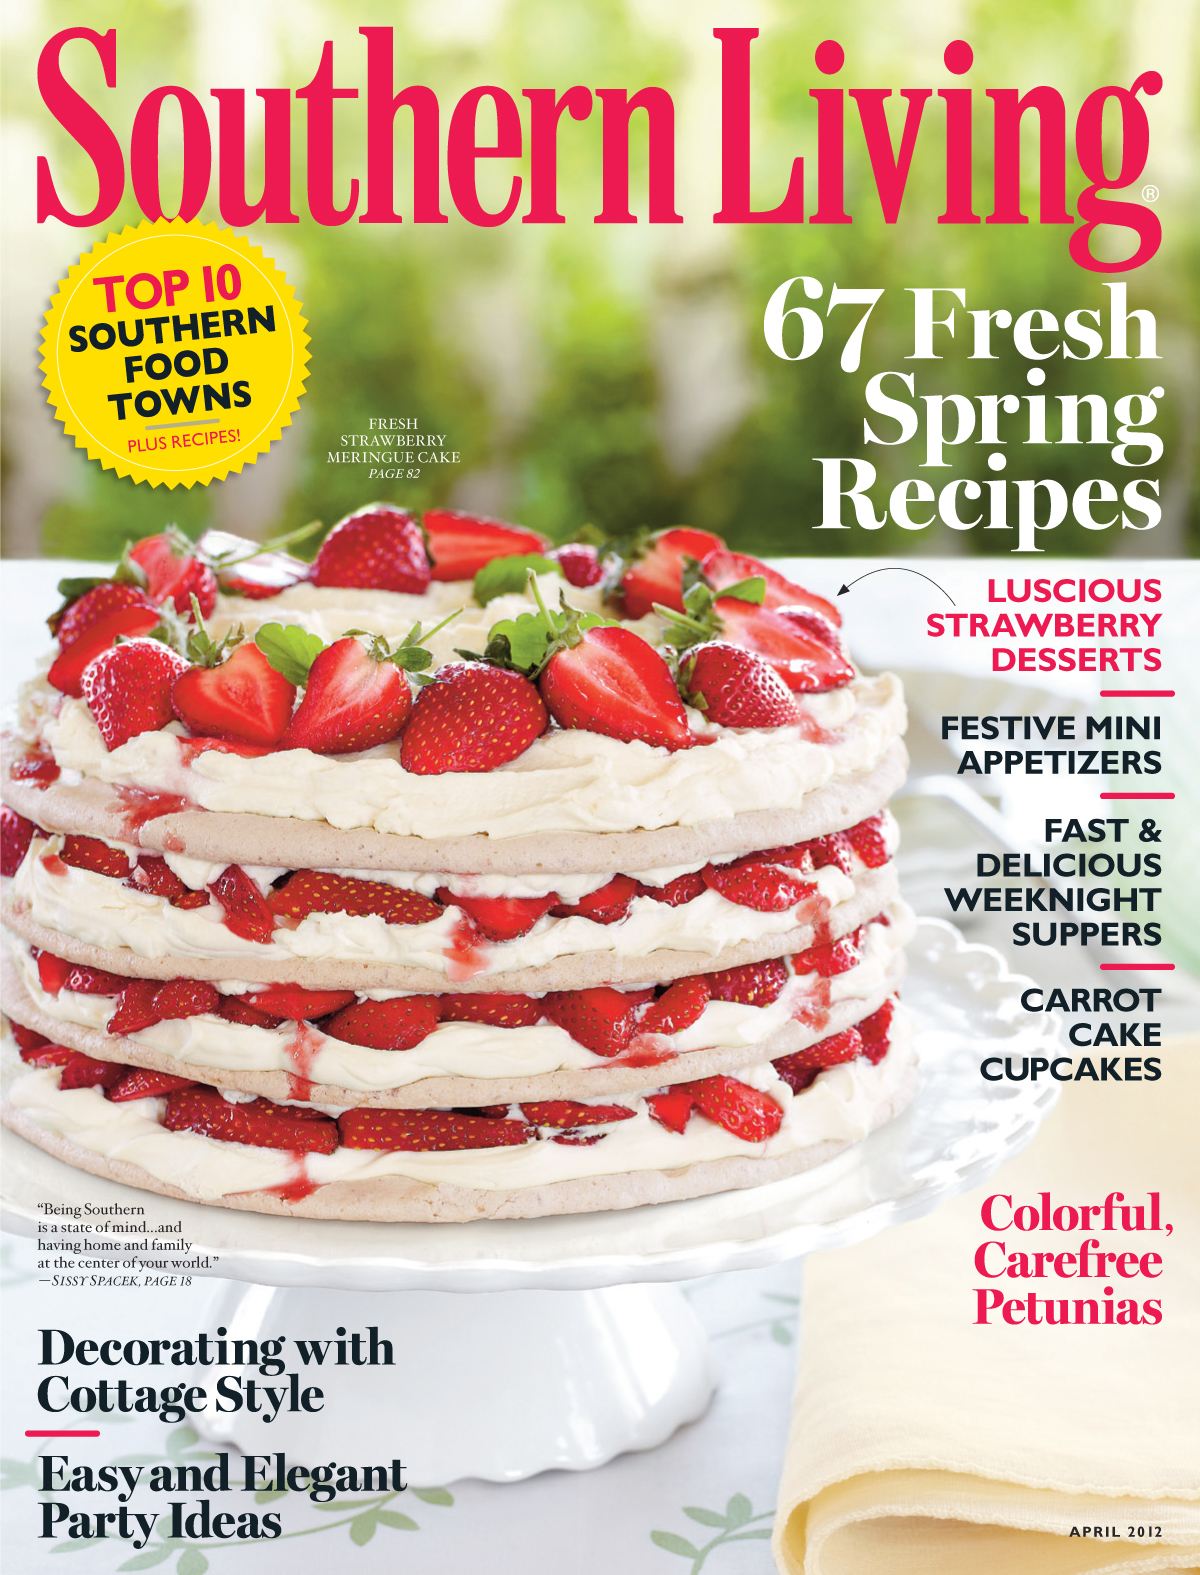 Southern Living One-Year Magazine Subscription Only $5! - Couponing 101